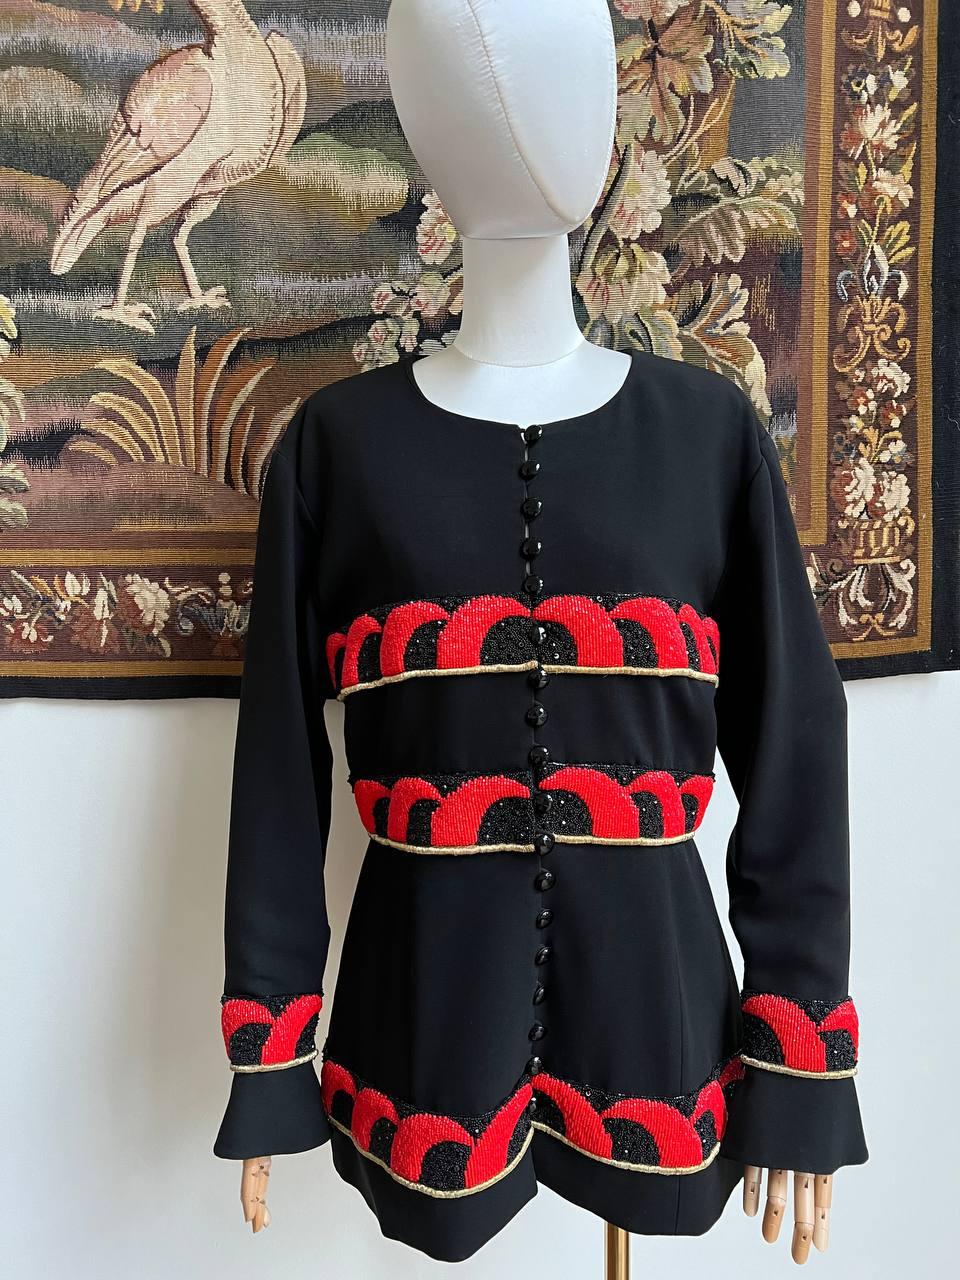 Vintage black evening jacket by Karl Lagerfeld decorated with beaded and sequin embroidery in black and red colors. 
From 1980's collection. 
Collarless. 
Button closure.
Size: 42 (L)
Condition: very good, minor pull at front
Measurements: